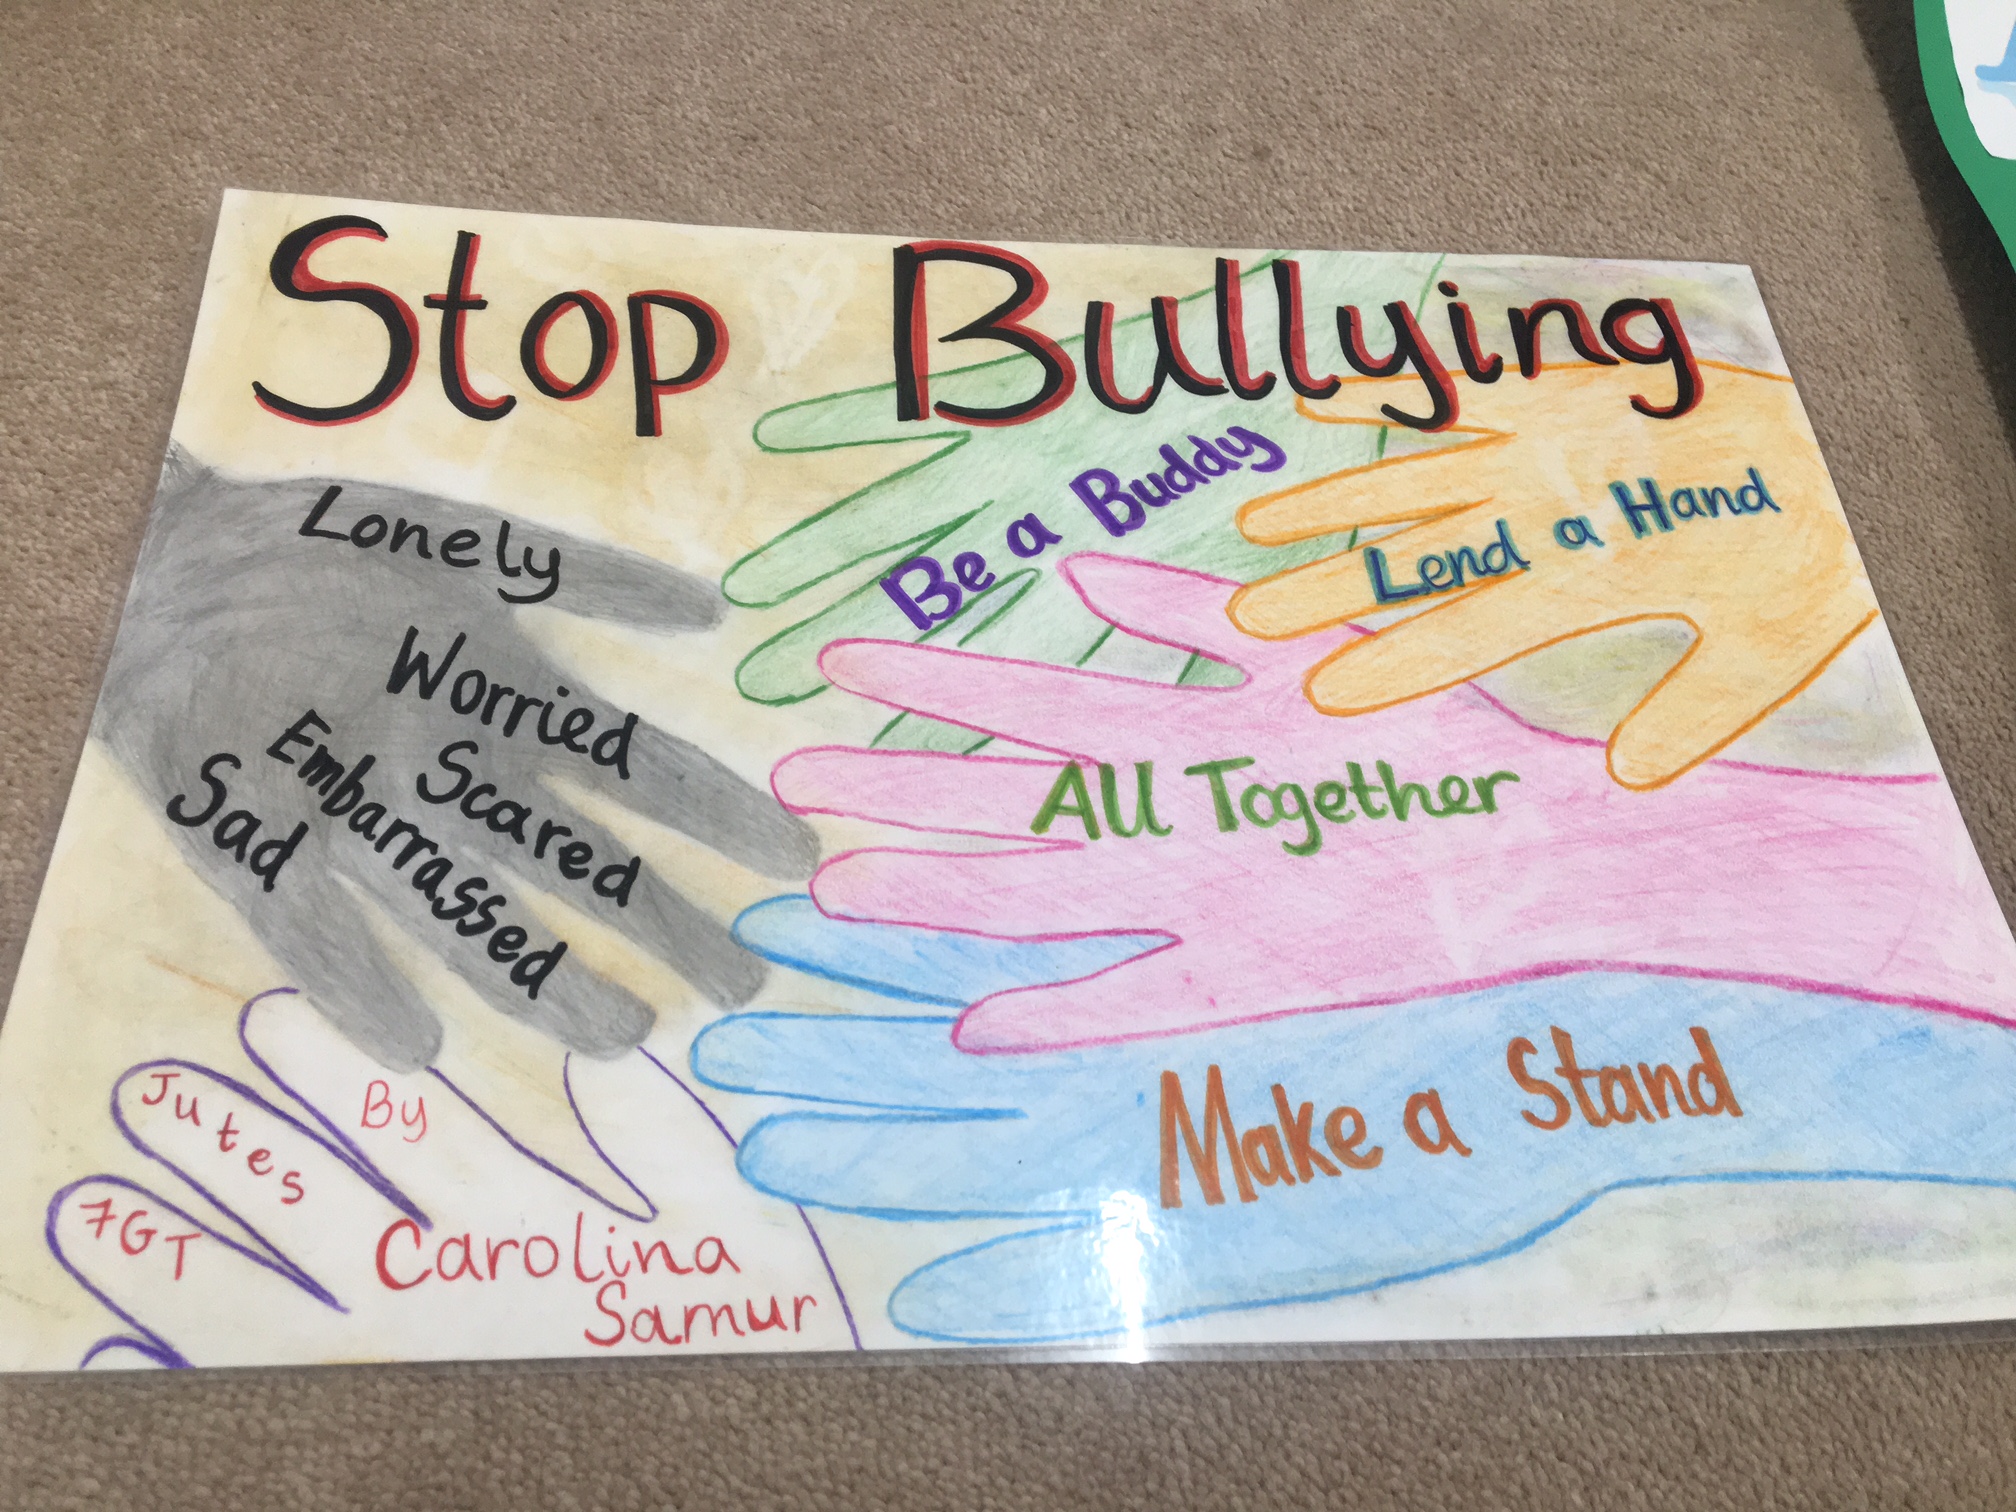 Anti Bullying Posters For Schools